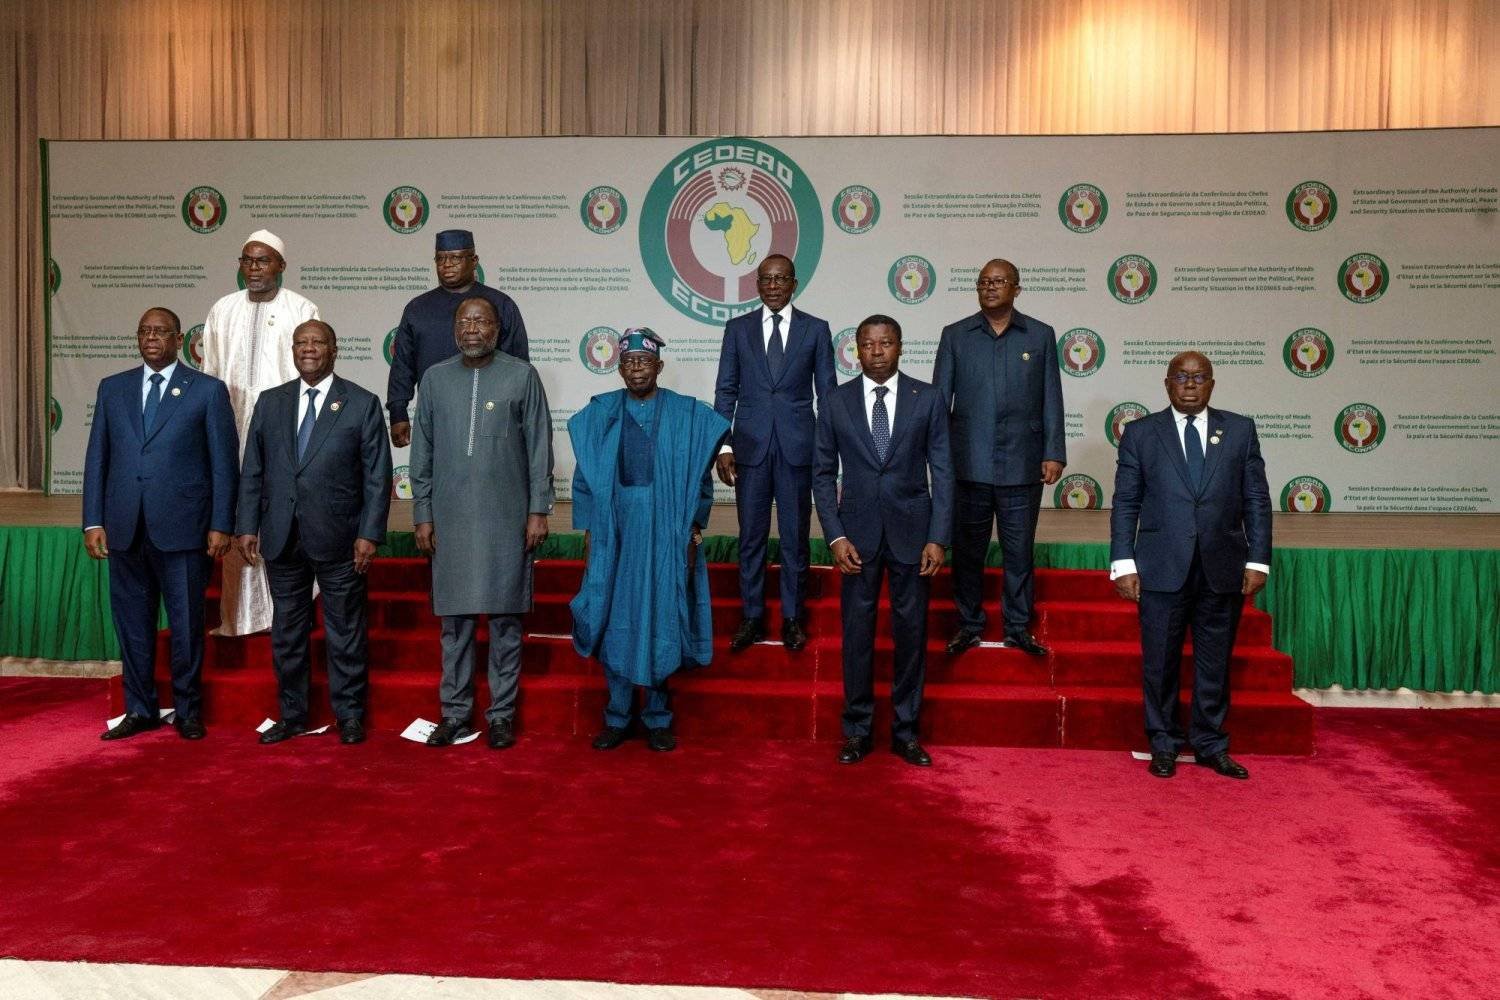 A group photo of the leaders of the ECOWAS countries in Abuja on Saturday. (Reuters)